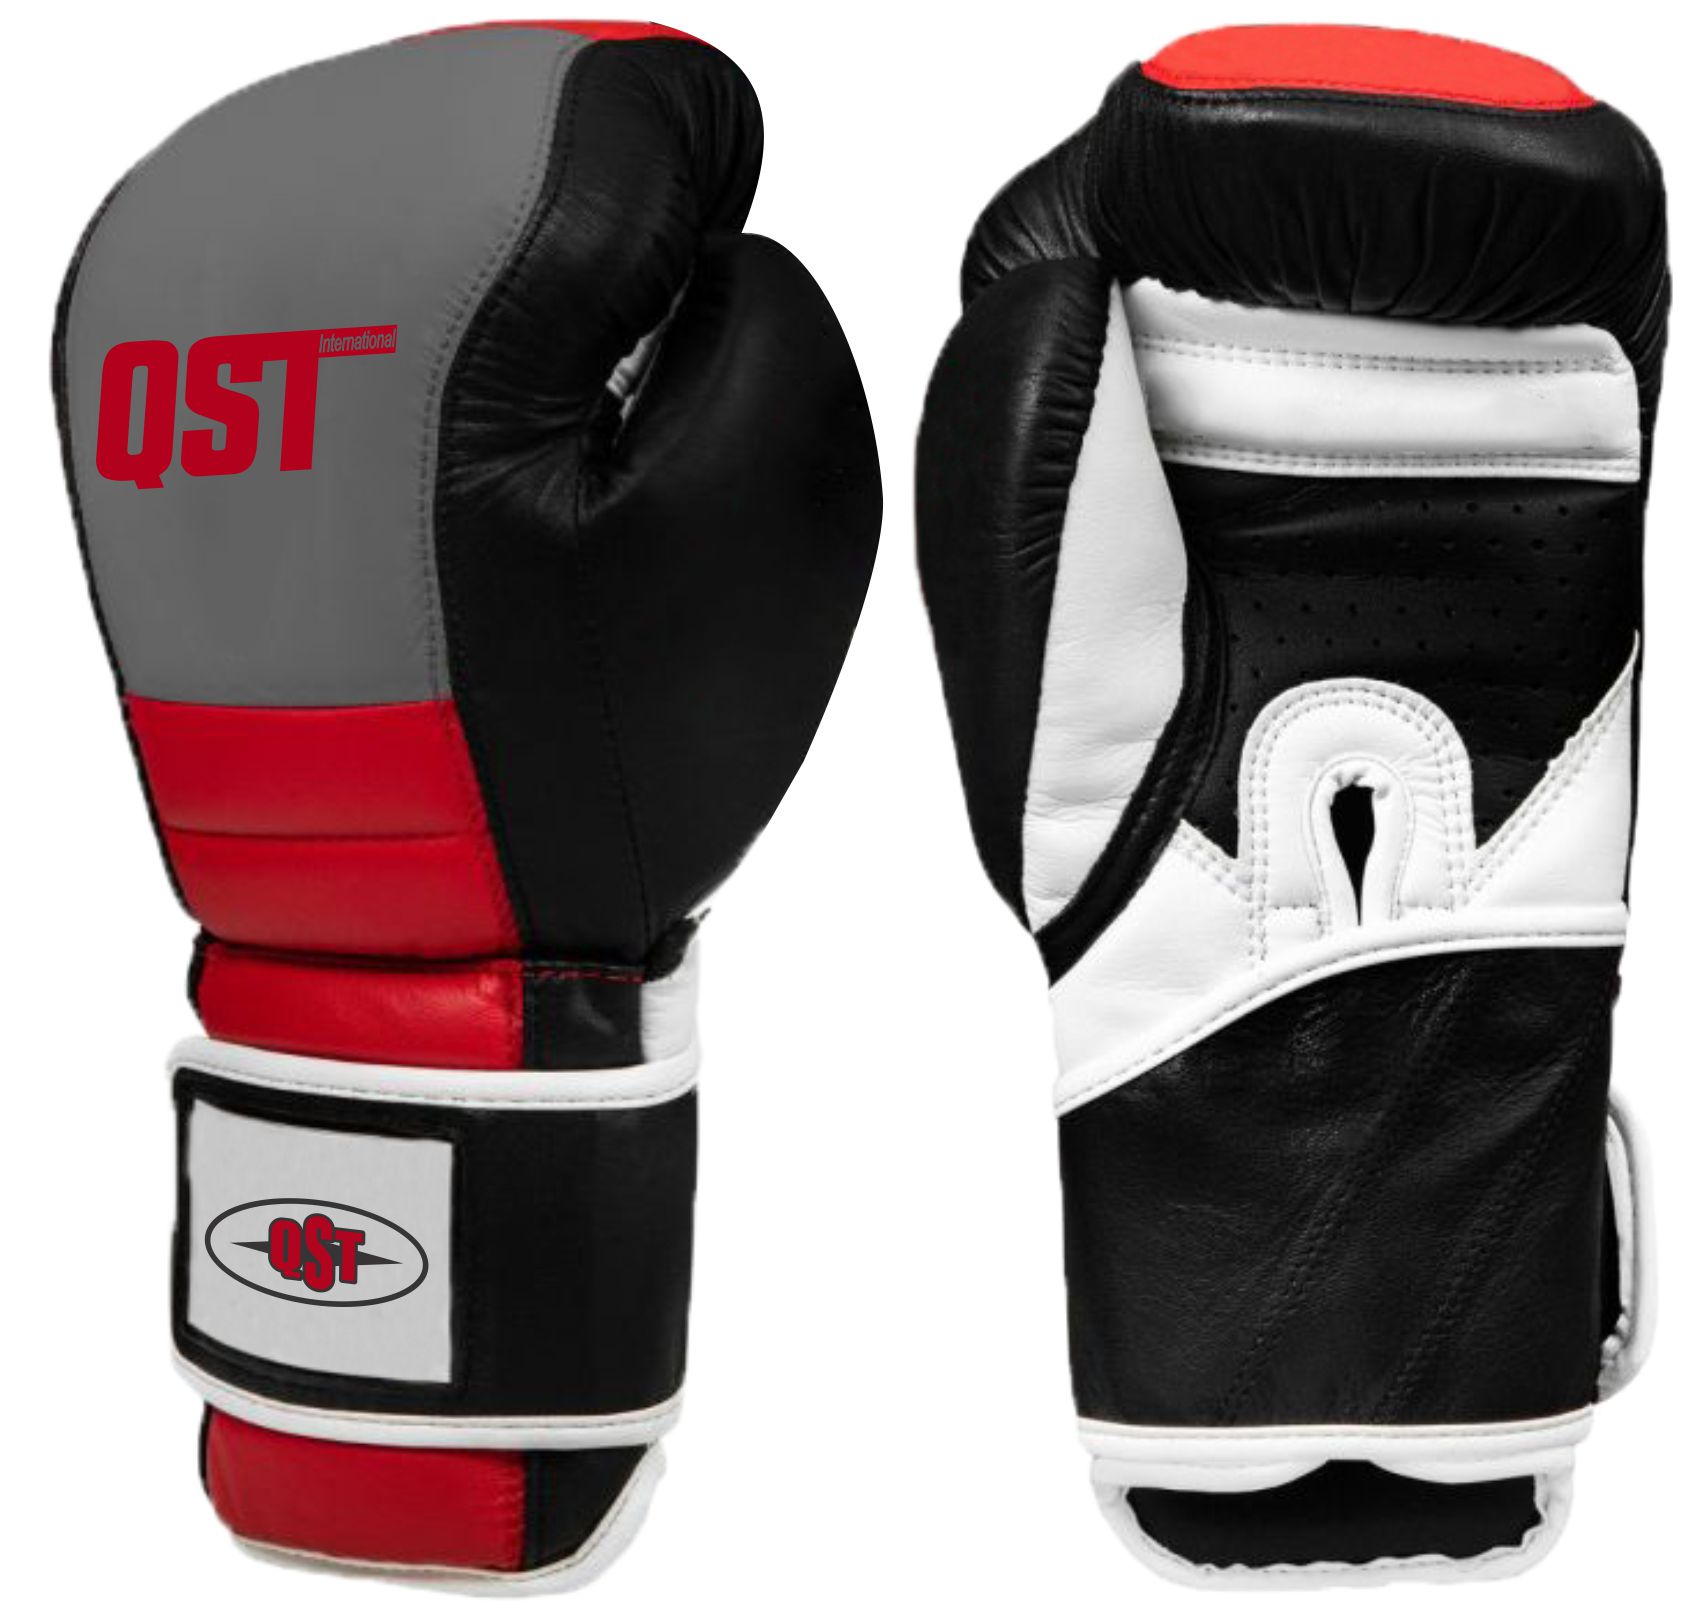 Professional Boxing Gloves - PRG-1517